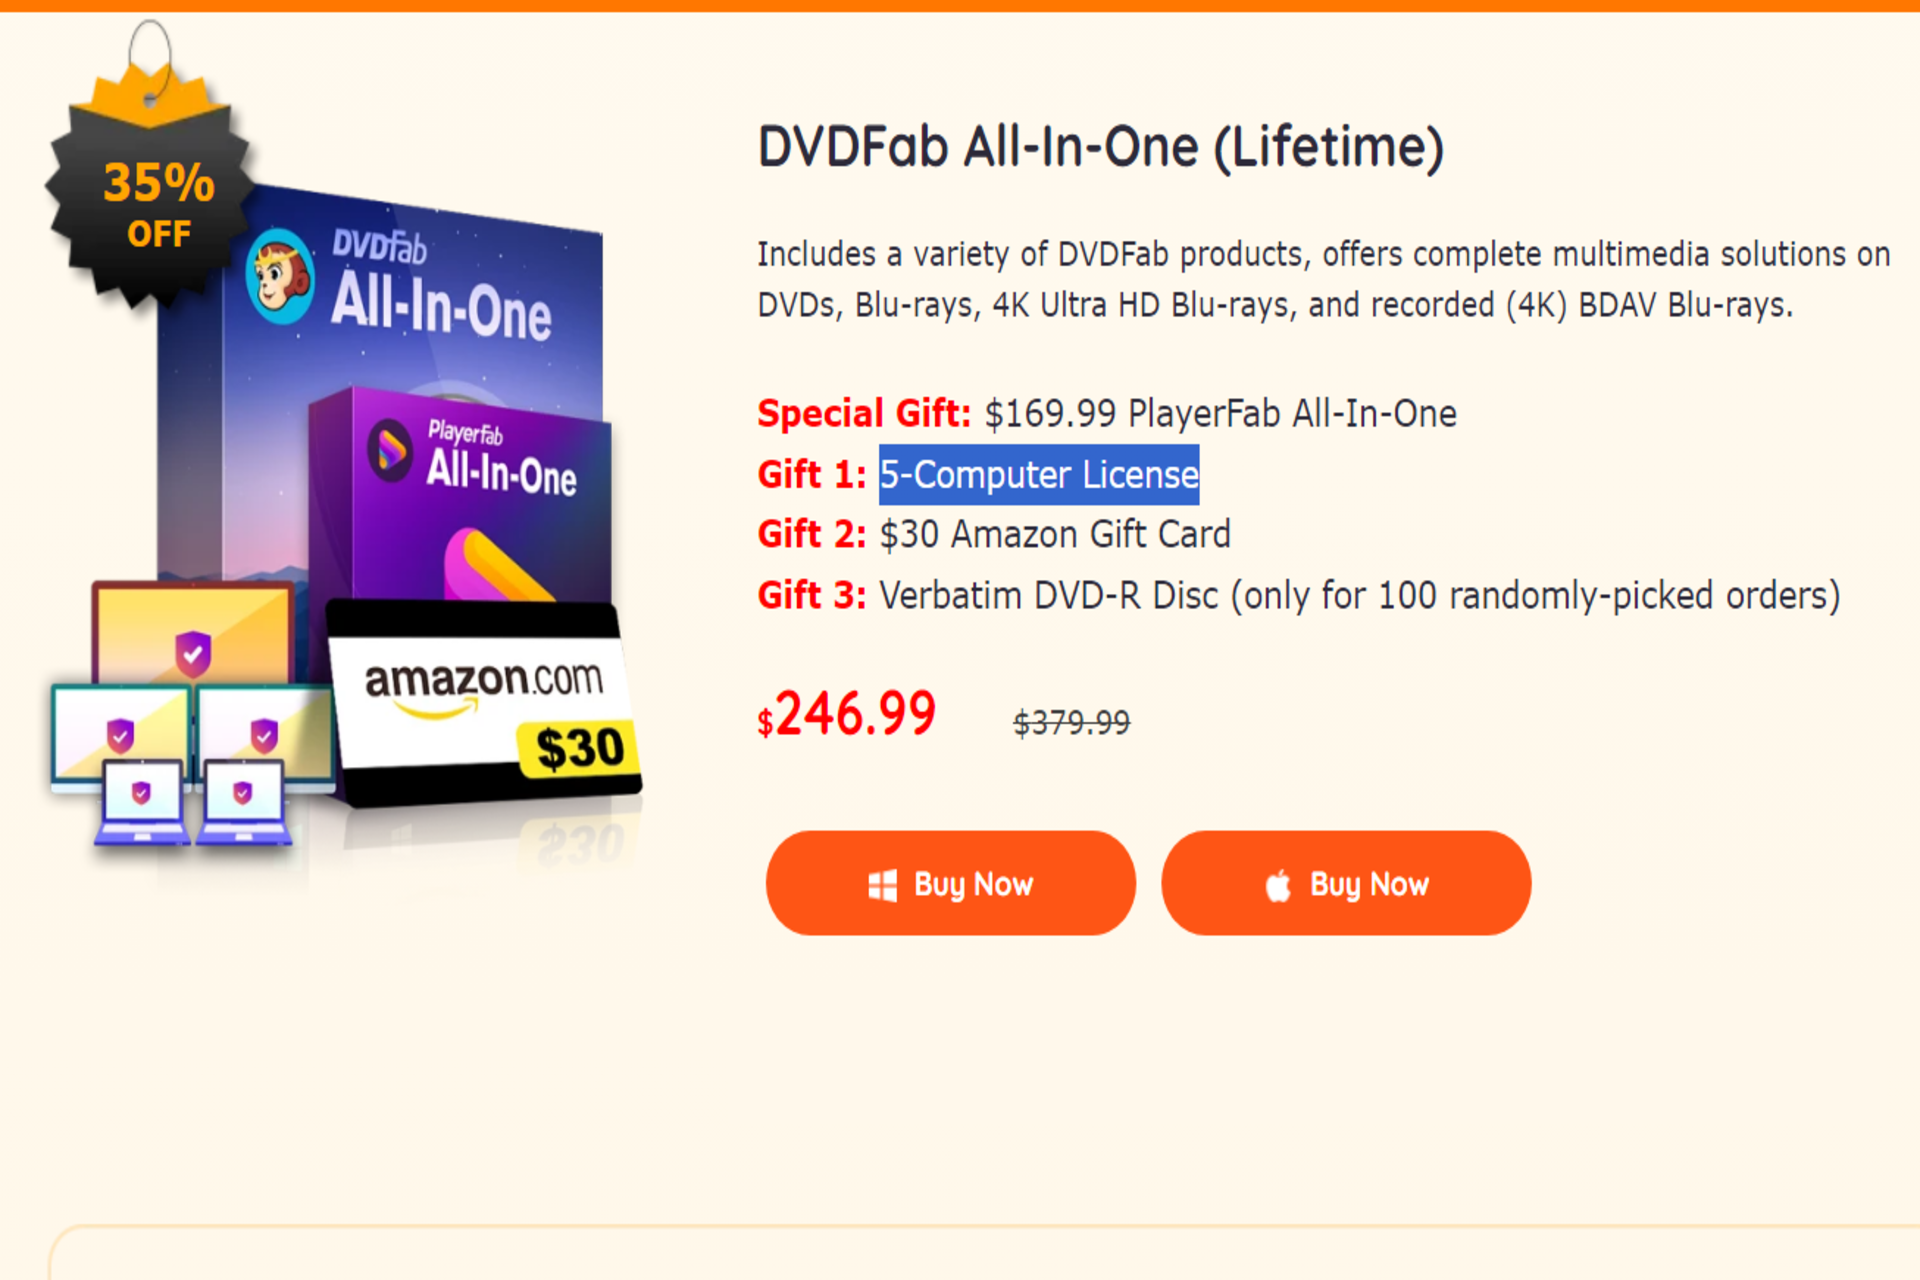 Save 35% on DVDFab All-In-One (Lifetime) This Cyber Monday